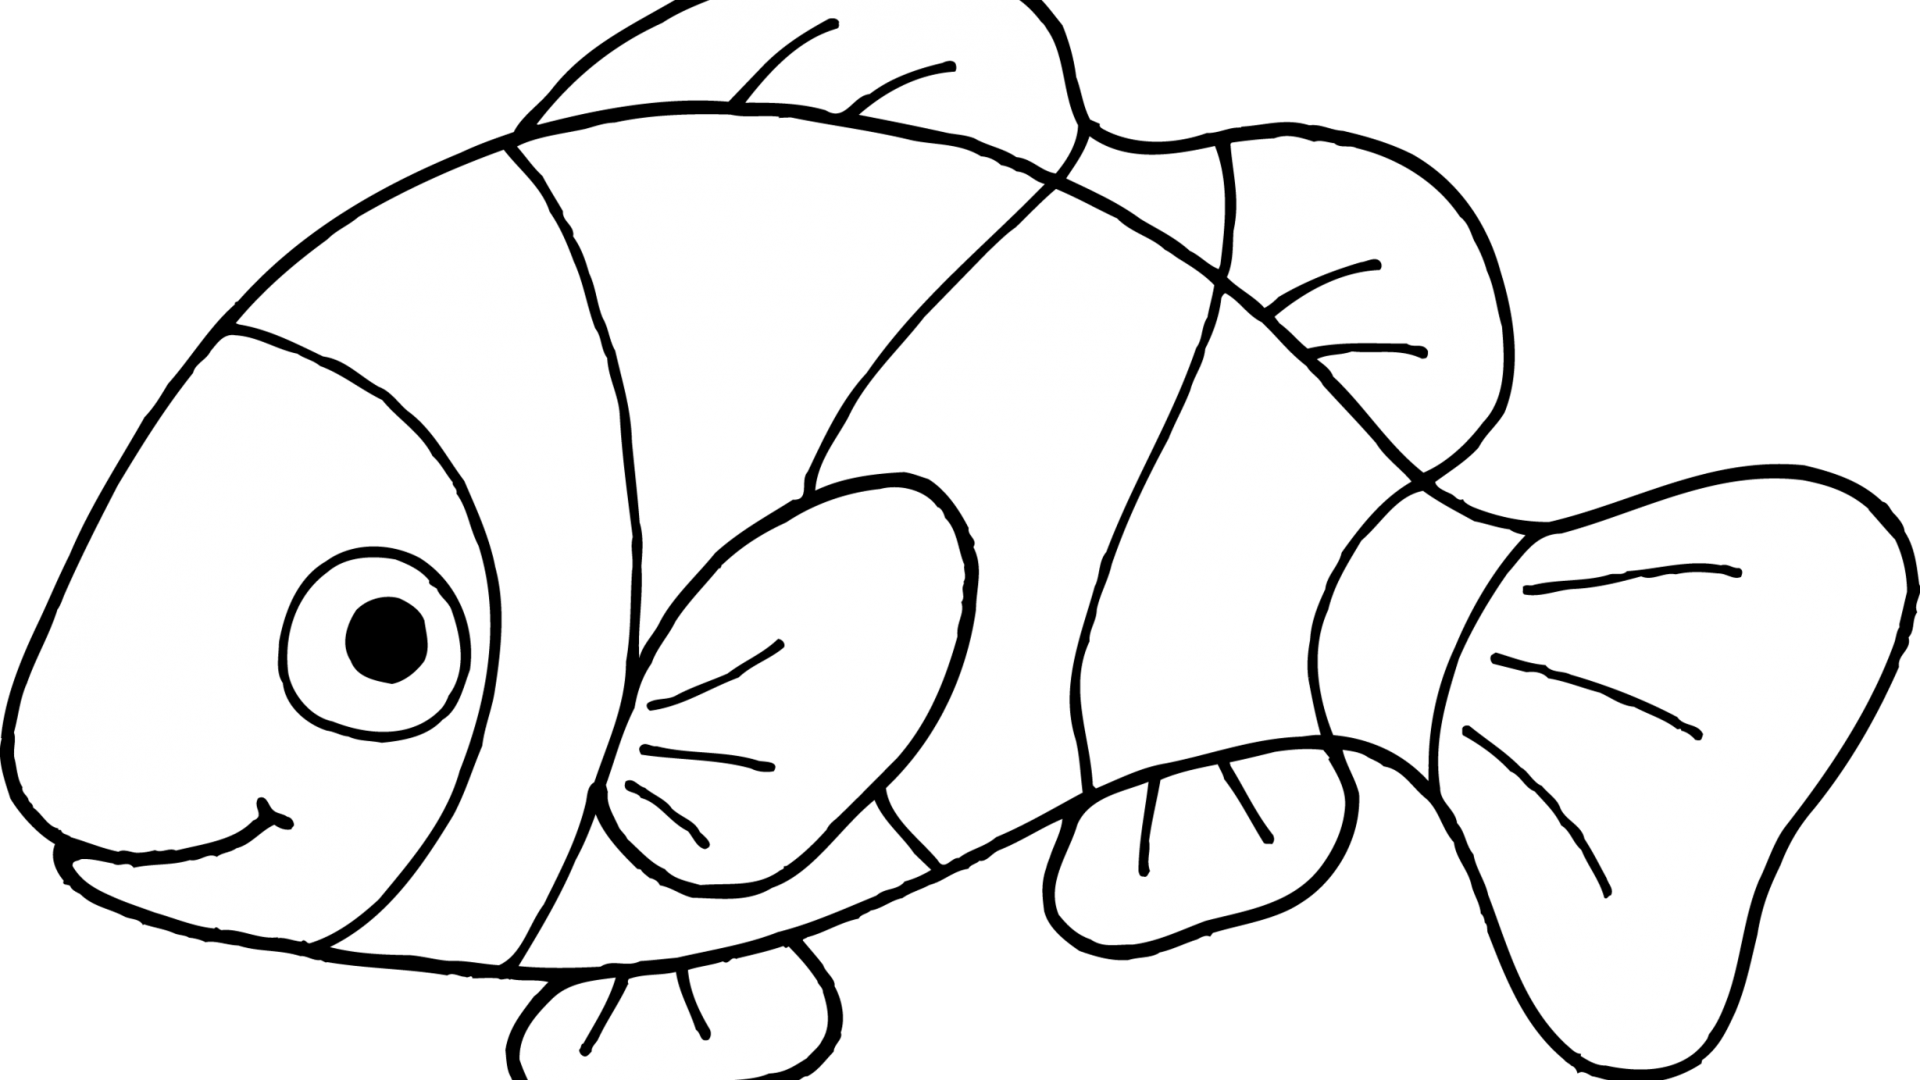 Clown Fish Coloring Page Worksheet Coloring Pages Clownfish - Clip Art Fish Black And White (1920x1080)